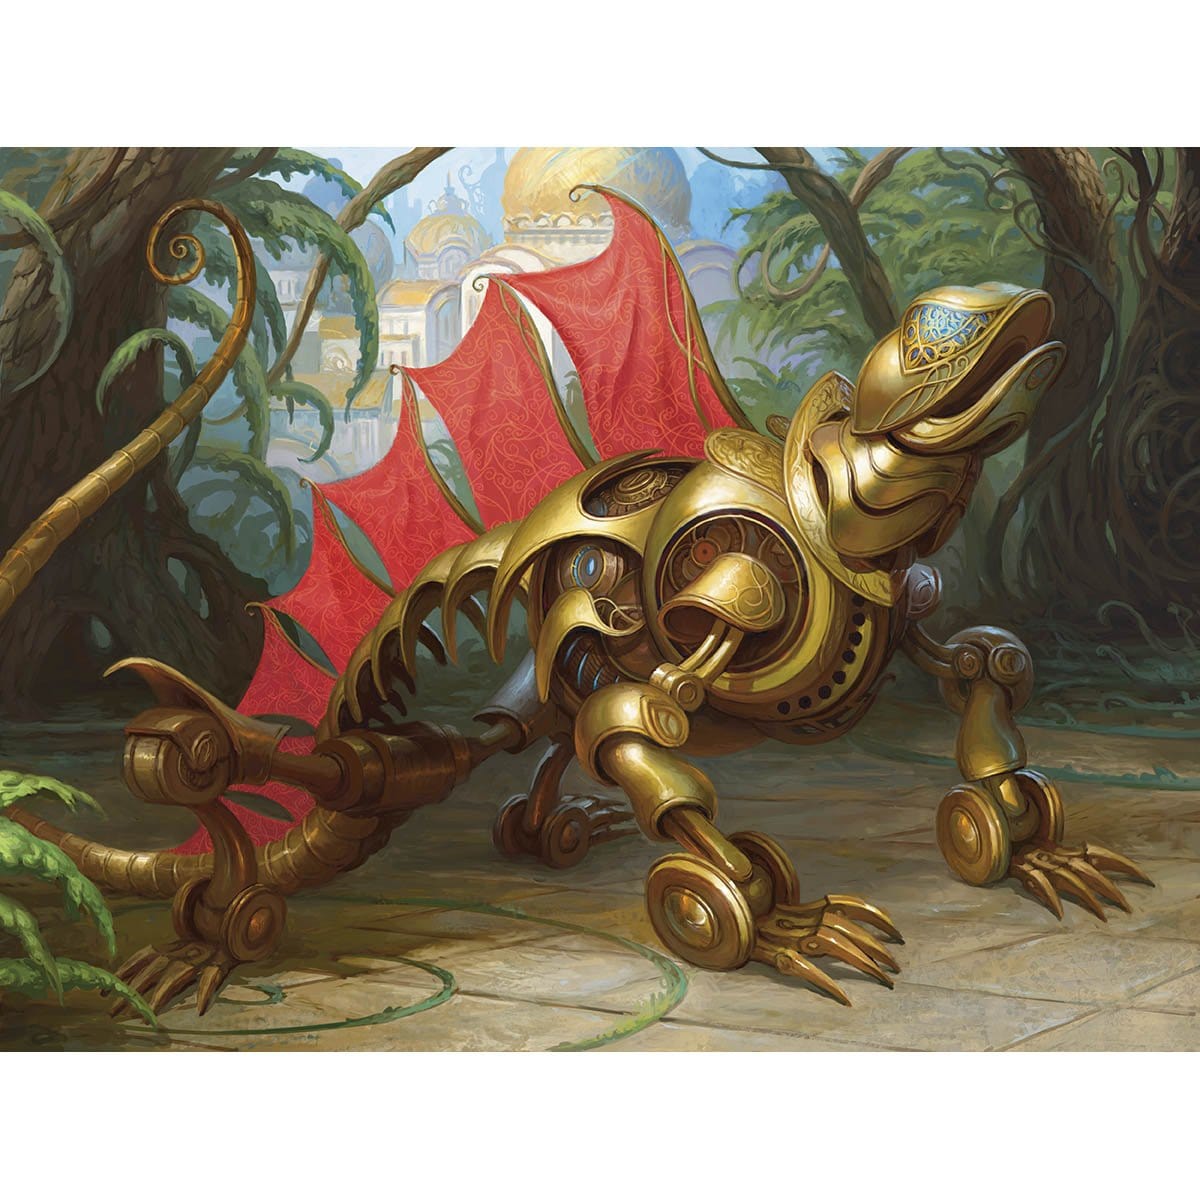 Weldfast Monitor Print - Print - Original Magic Art - Accessories for Magic the Gathering and other card games